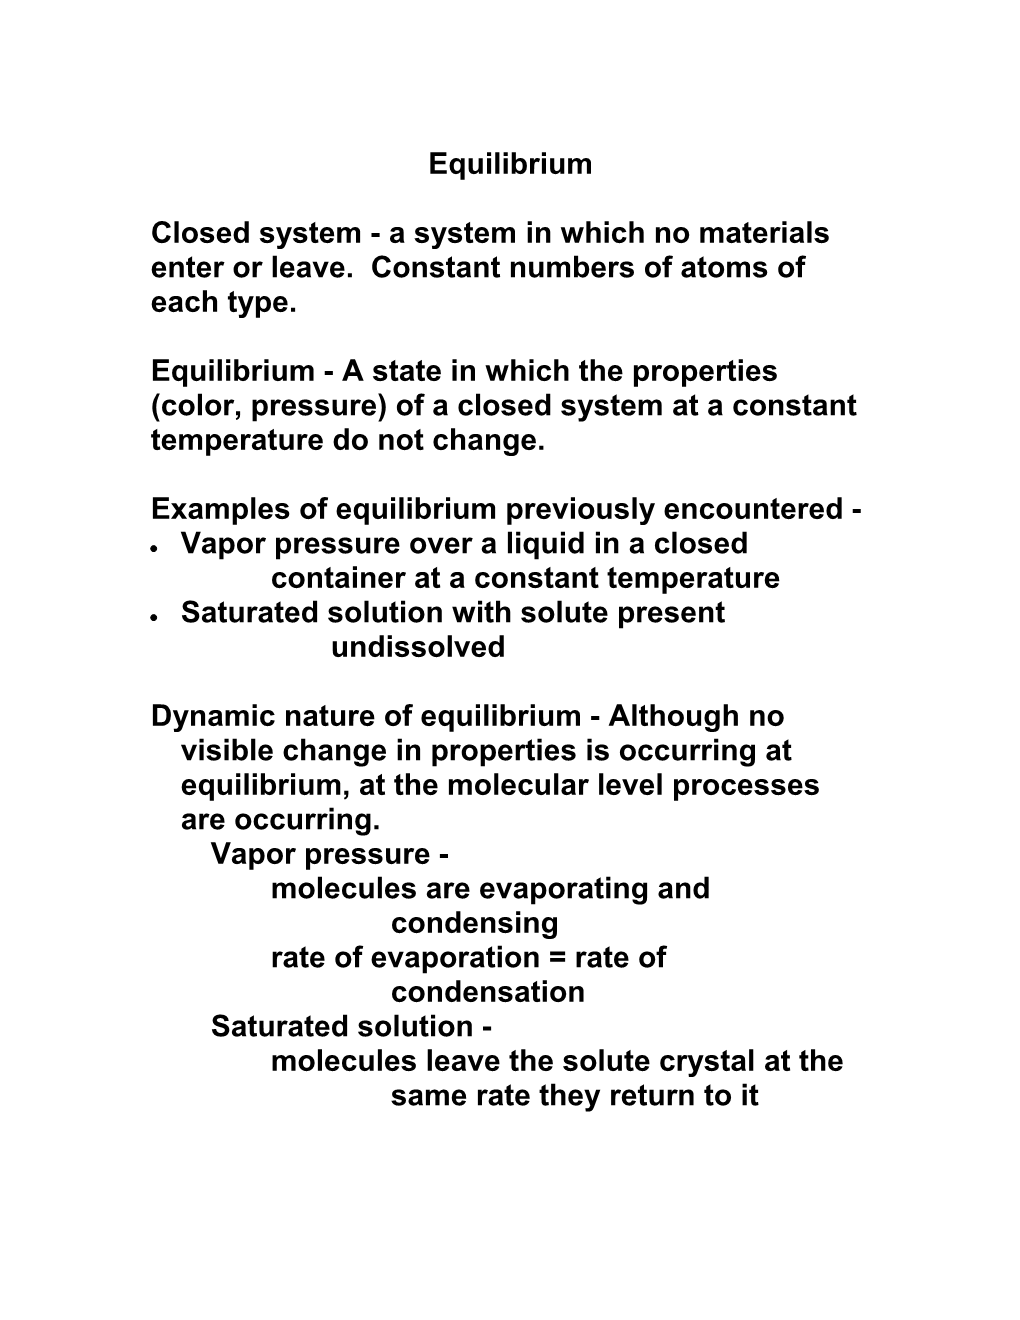 Examples of Equilibrium Previously Encountered